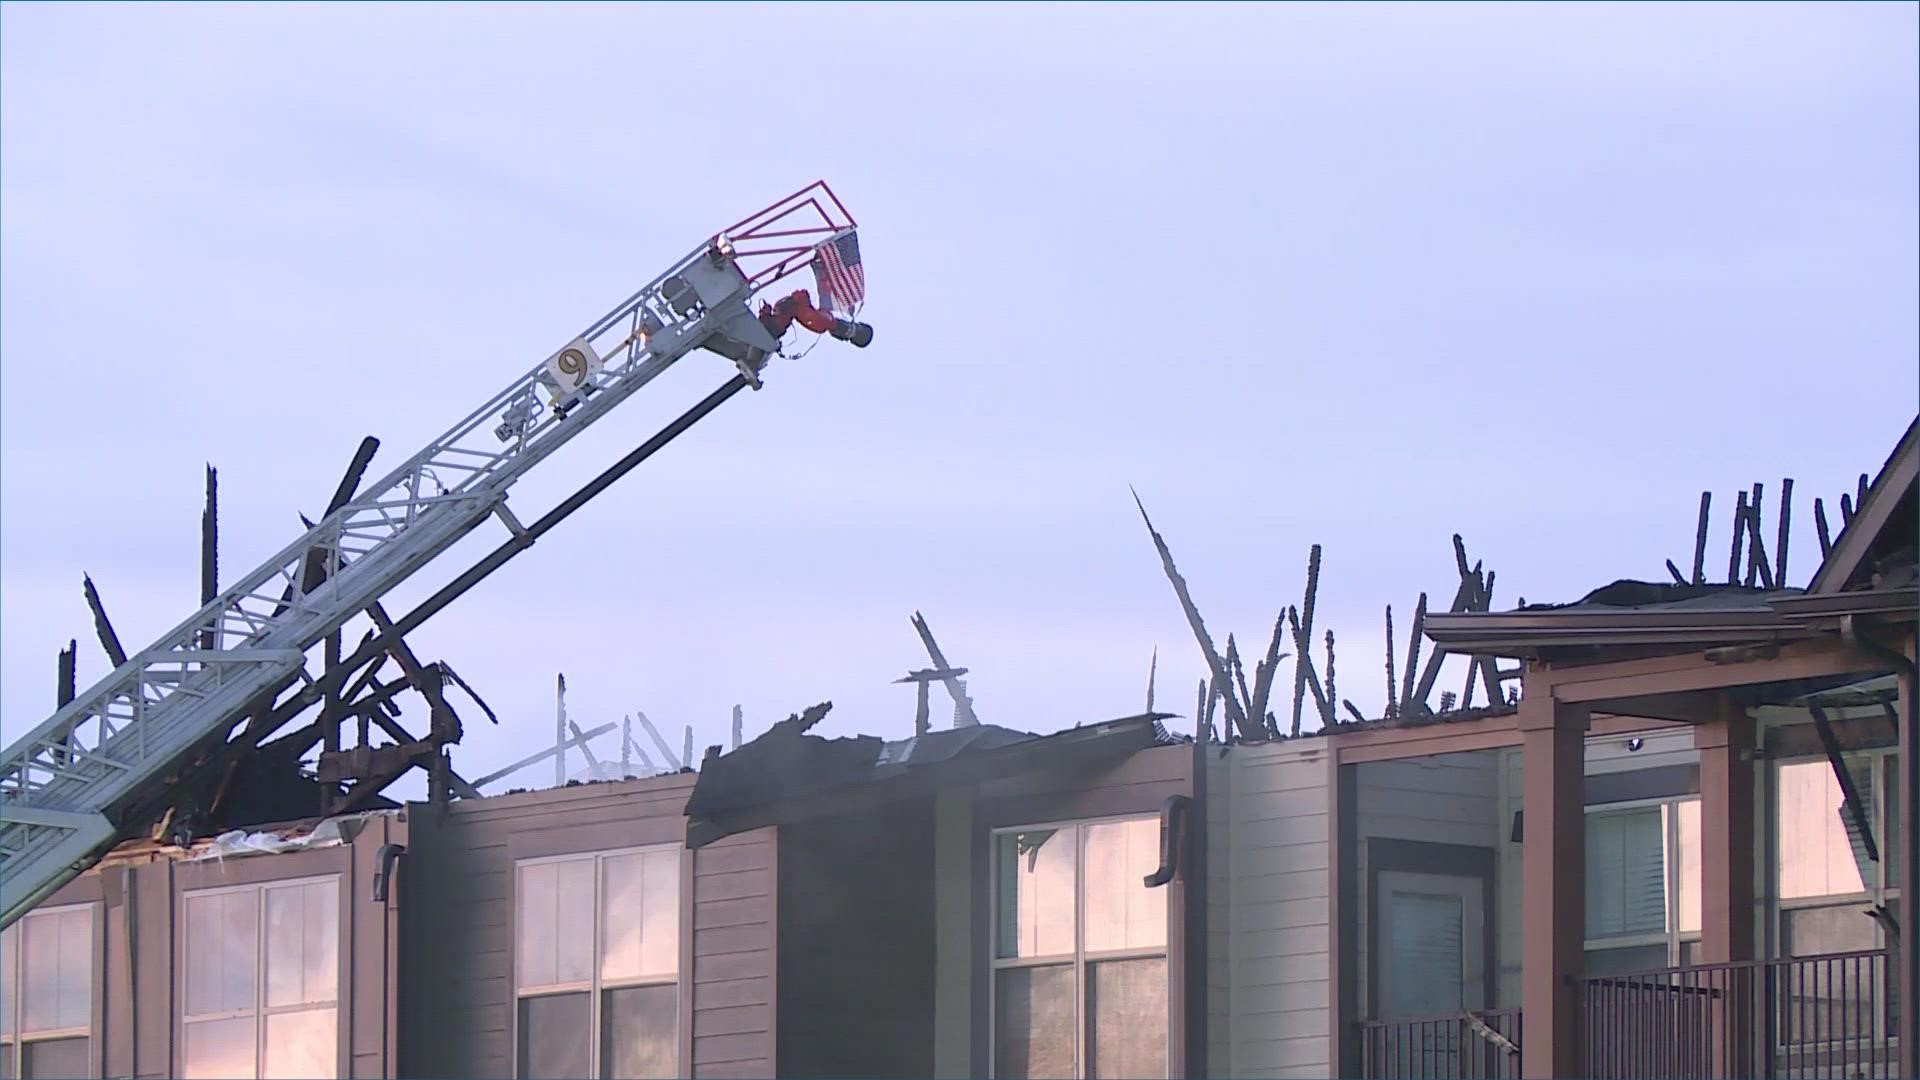 The Colorado Springs Fire Department said the fire Friday night was sparked by lightning.